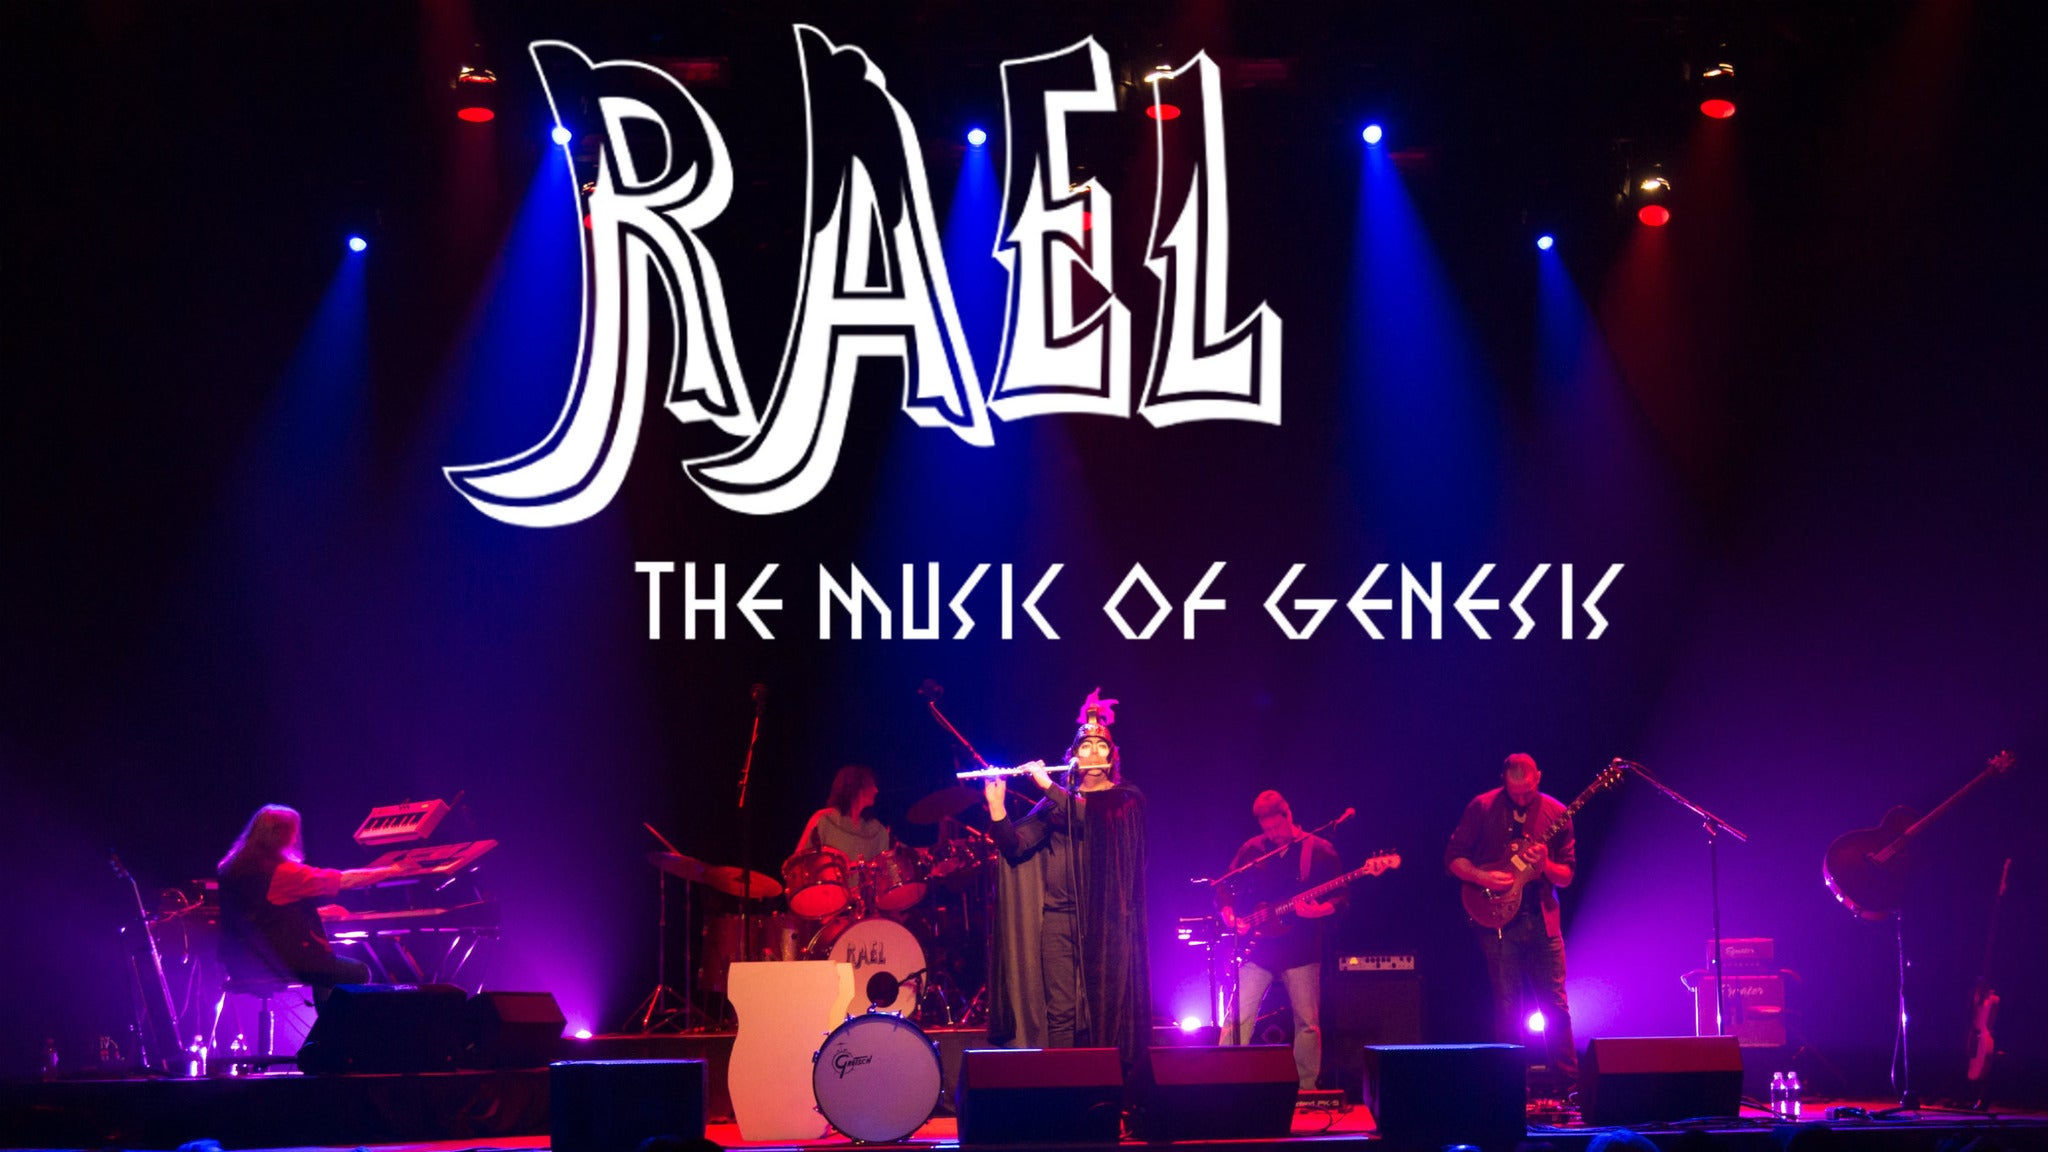 RAEL - The Music of Genesis in Red Bank promo photo for Member presale offer code